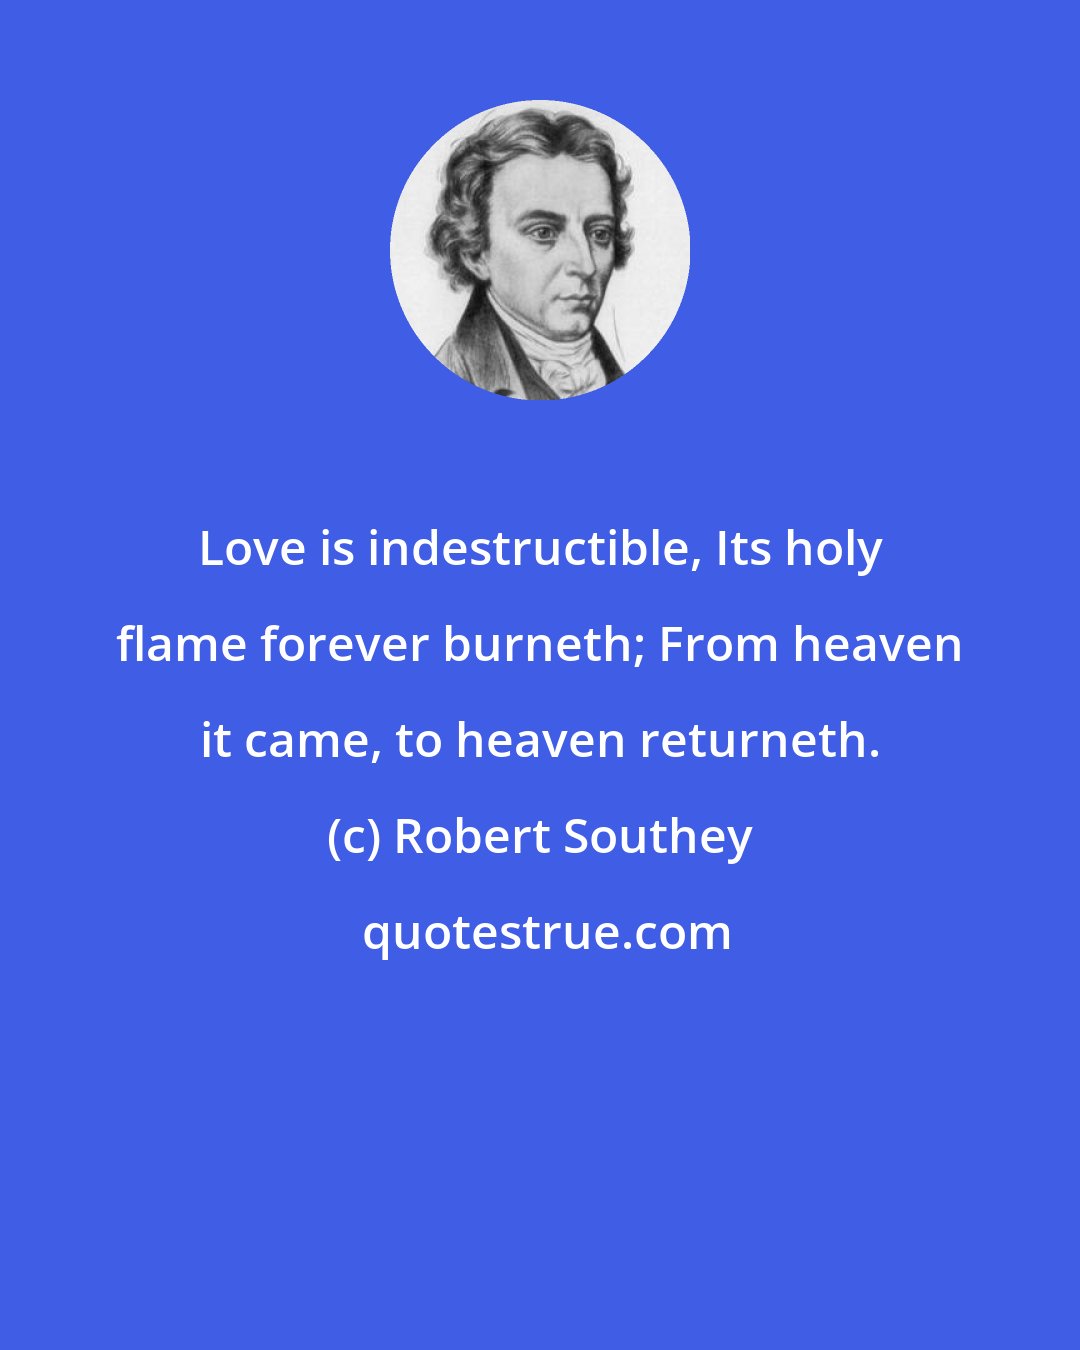 Robert Southey: Love is indestructible, Its holy flame forever burneth; From heaven it came, to heaven returneth.